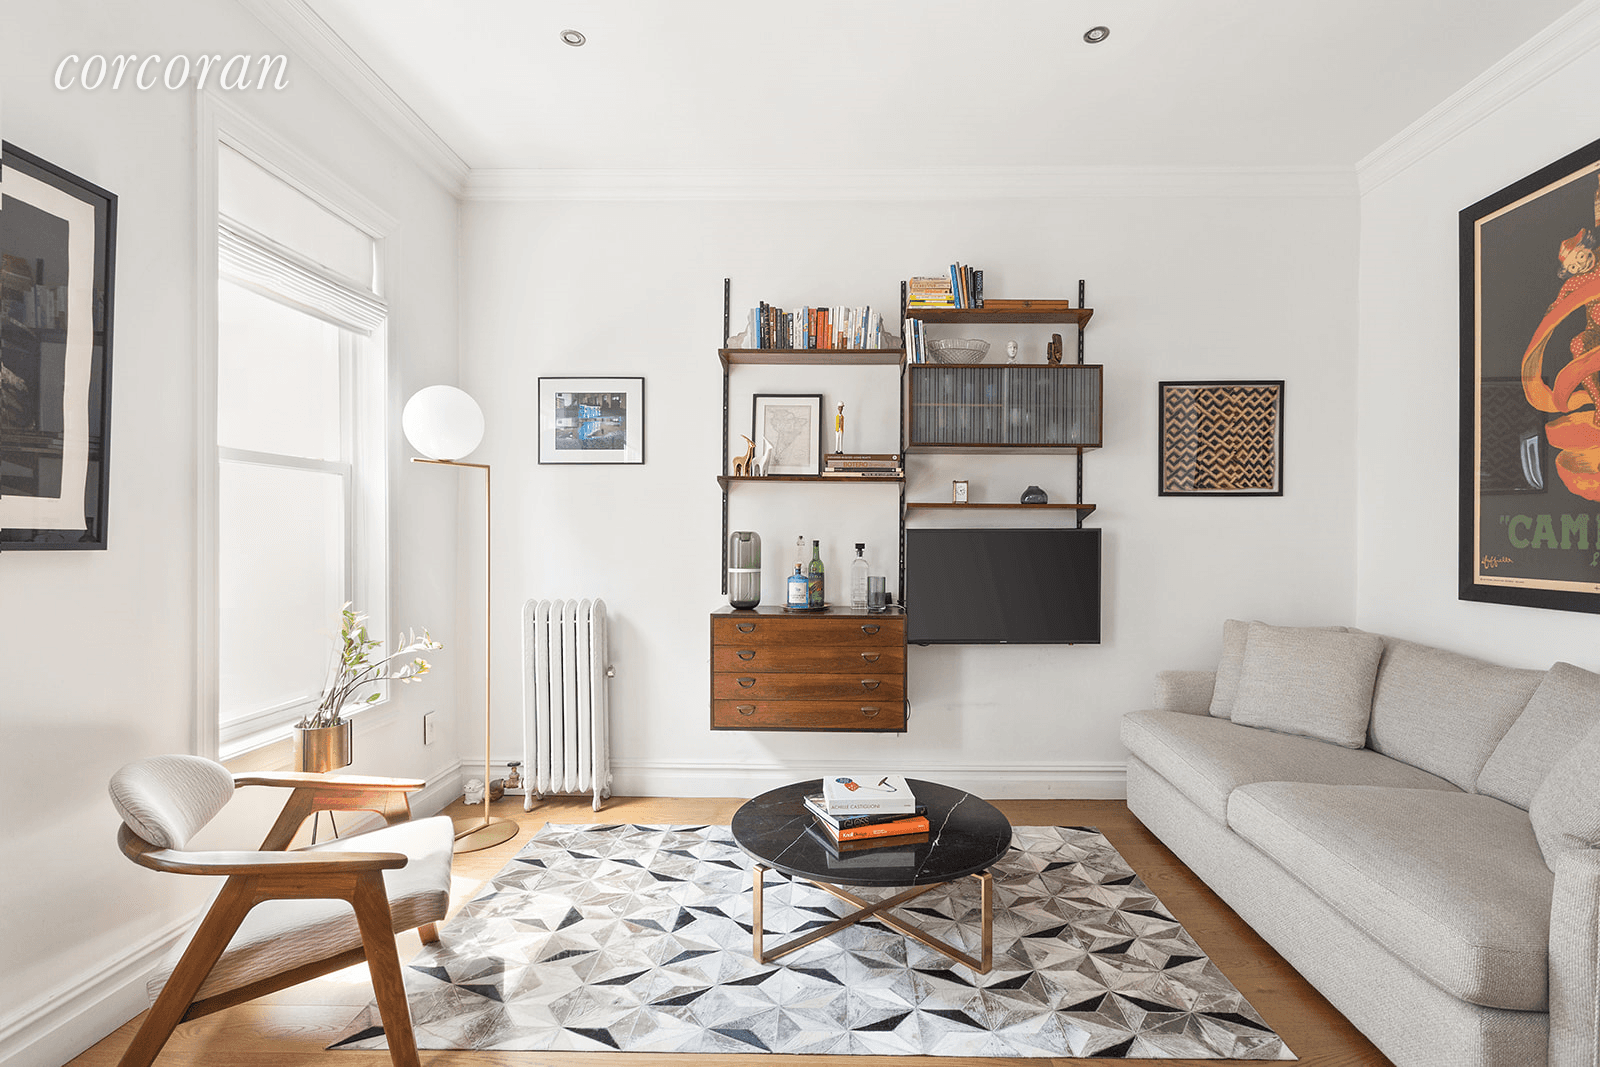 This South facing, sun filled apartment recently underwent a gut renovation to create a bright and functional space that celebrates the beauty of the historic building and its 96 high ...